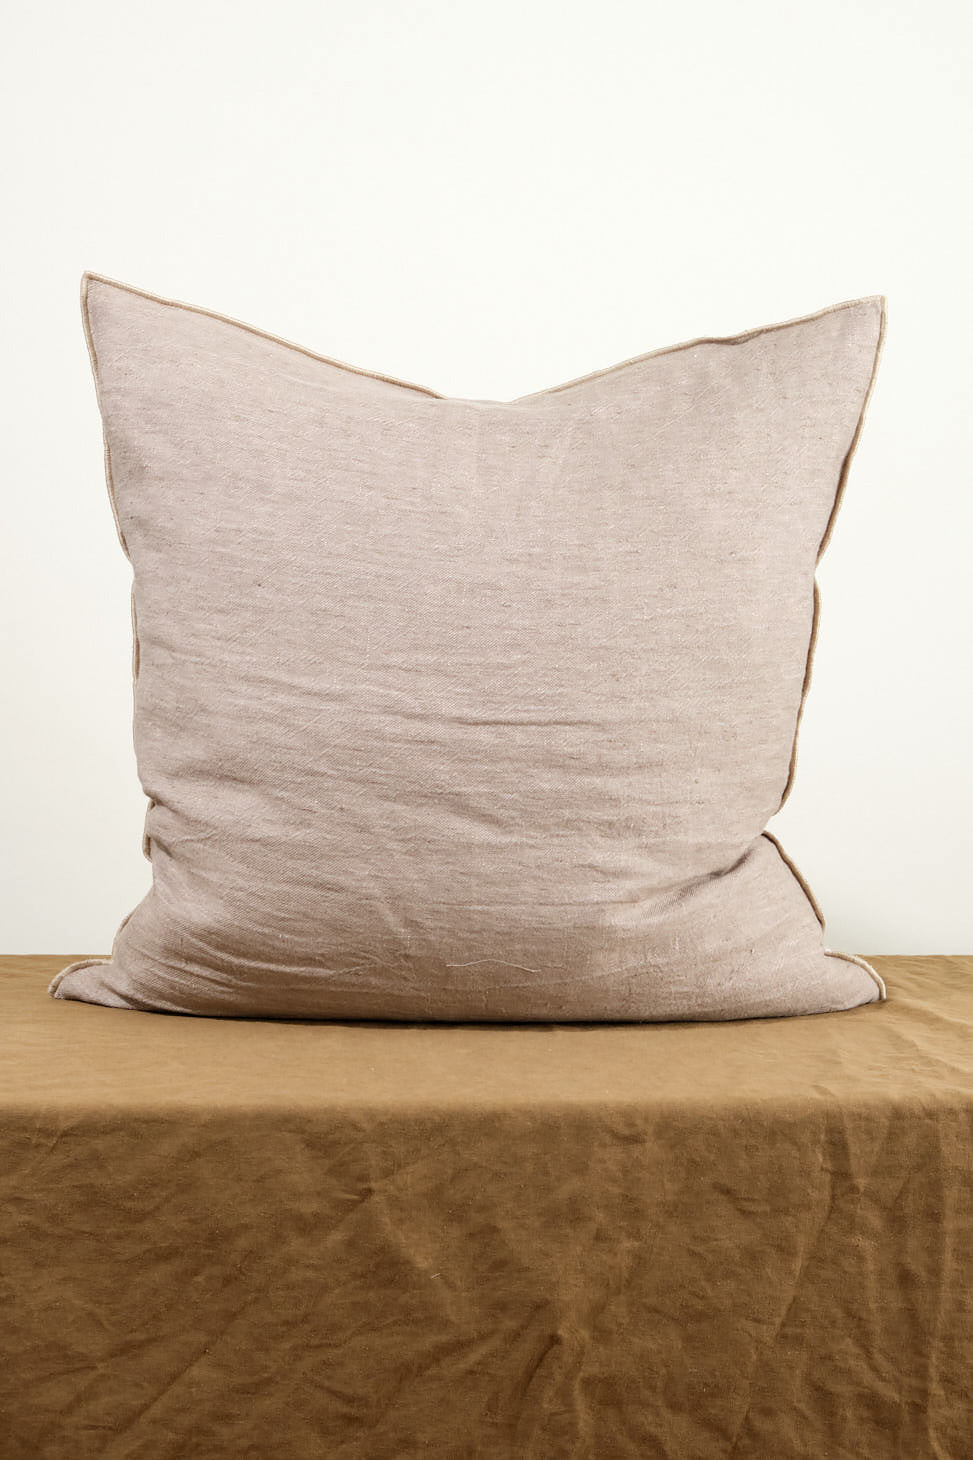 26" X 26" Crumpled Washed Linen Vice Versa Cushion in Taupe on table